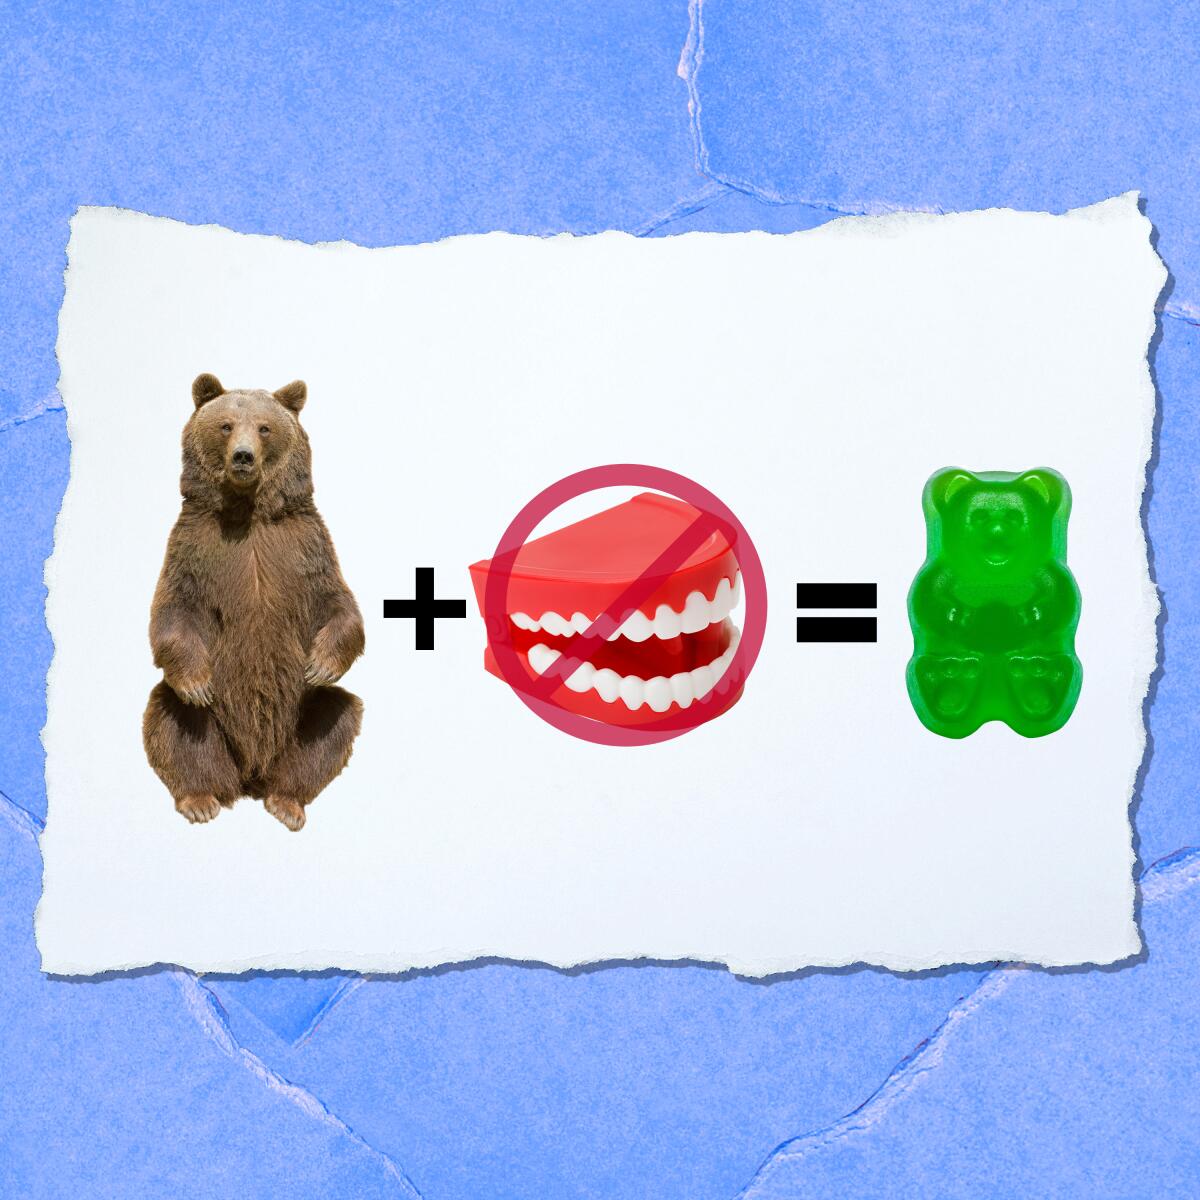 An illustration shows: a bear, a plus sign, a "not allowed" symbol over wind-up teeth, an equal sign and a gummy bear.